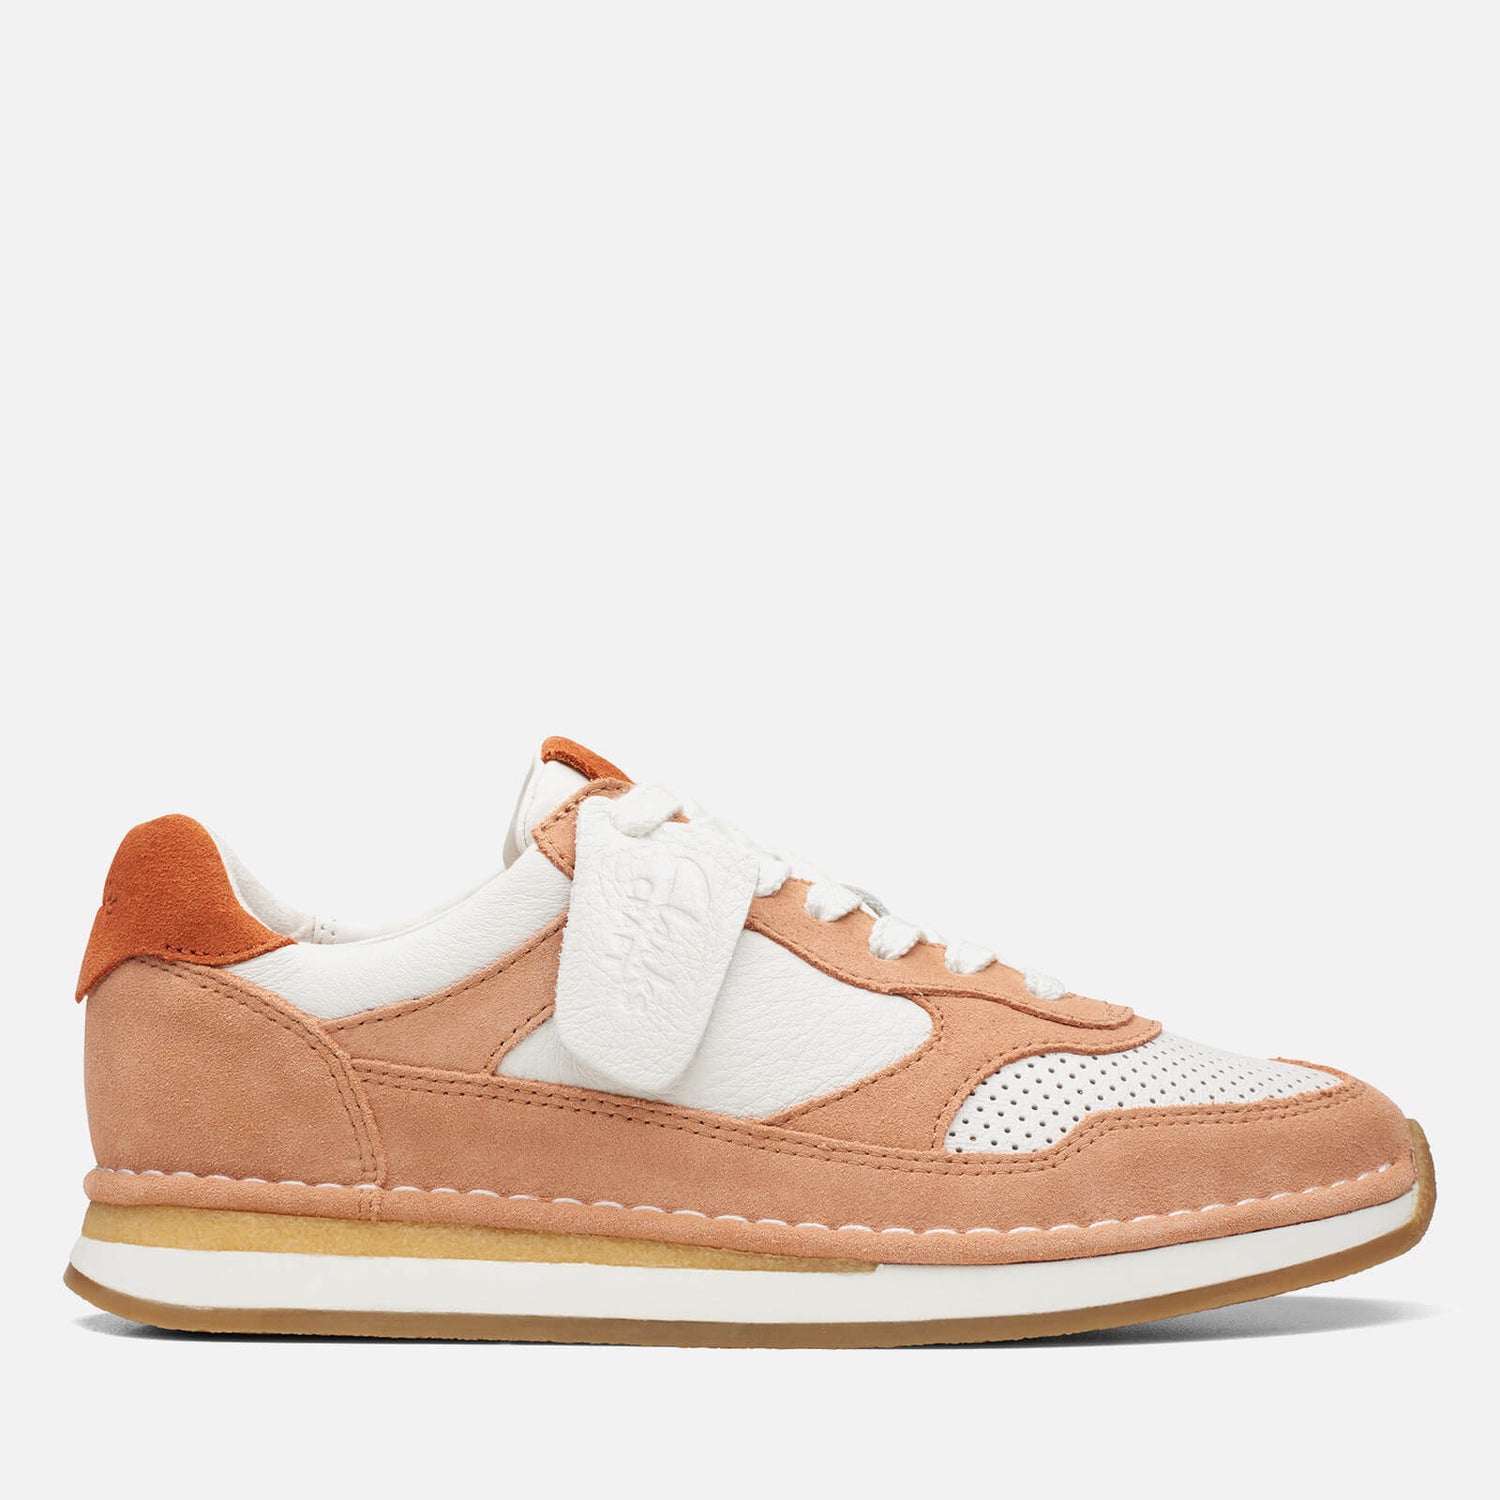 Clarks Craft Run Tor Suede and Leather Trainers - UK 3